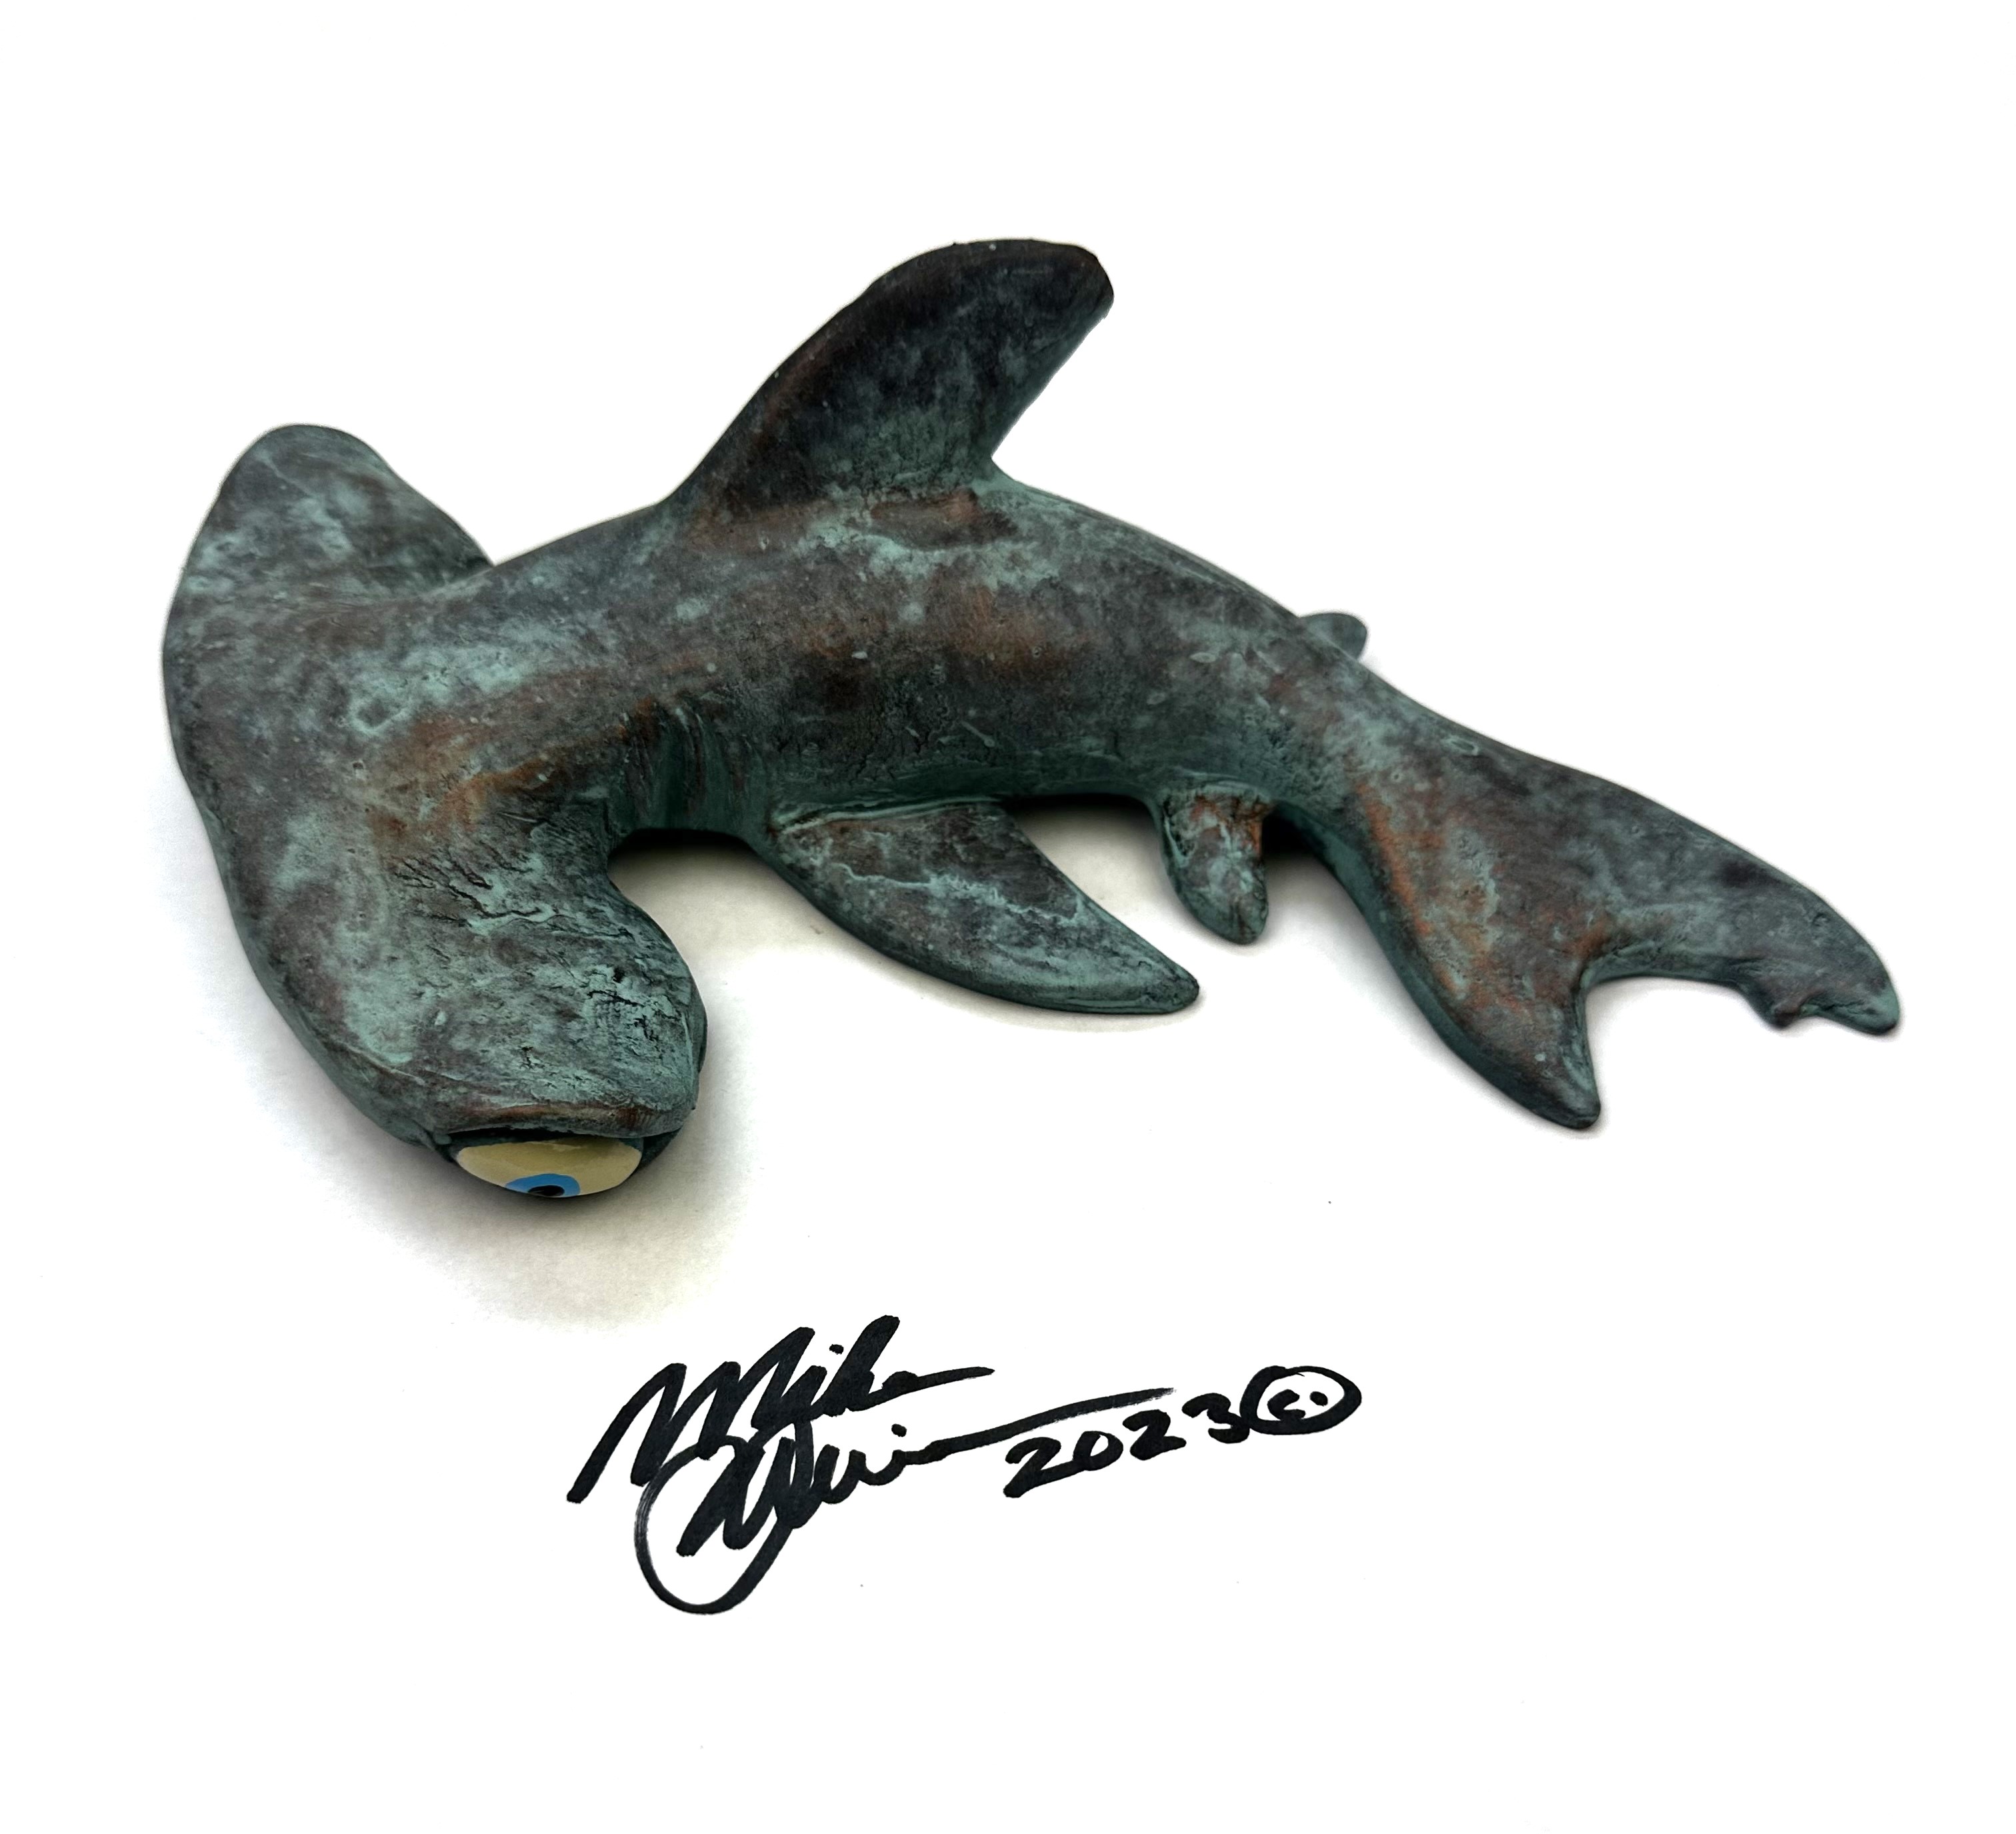 Shark, Hammerhead Shark, Museum Quality, Rubber Fish, Hand Painted,  Realistic Toy Figure, Model, Replica, Kids, Educational